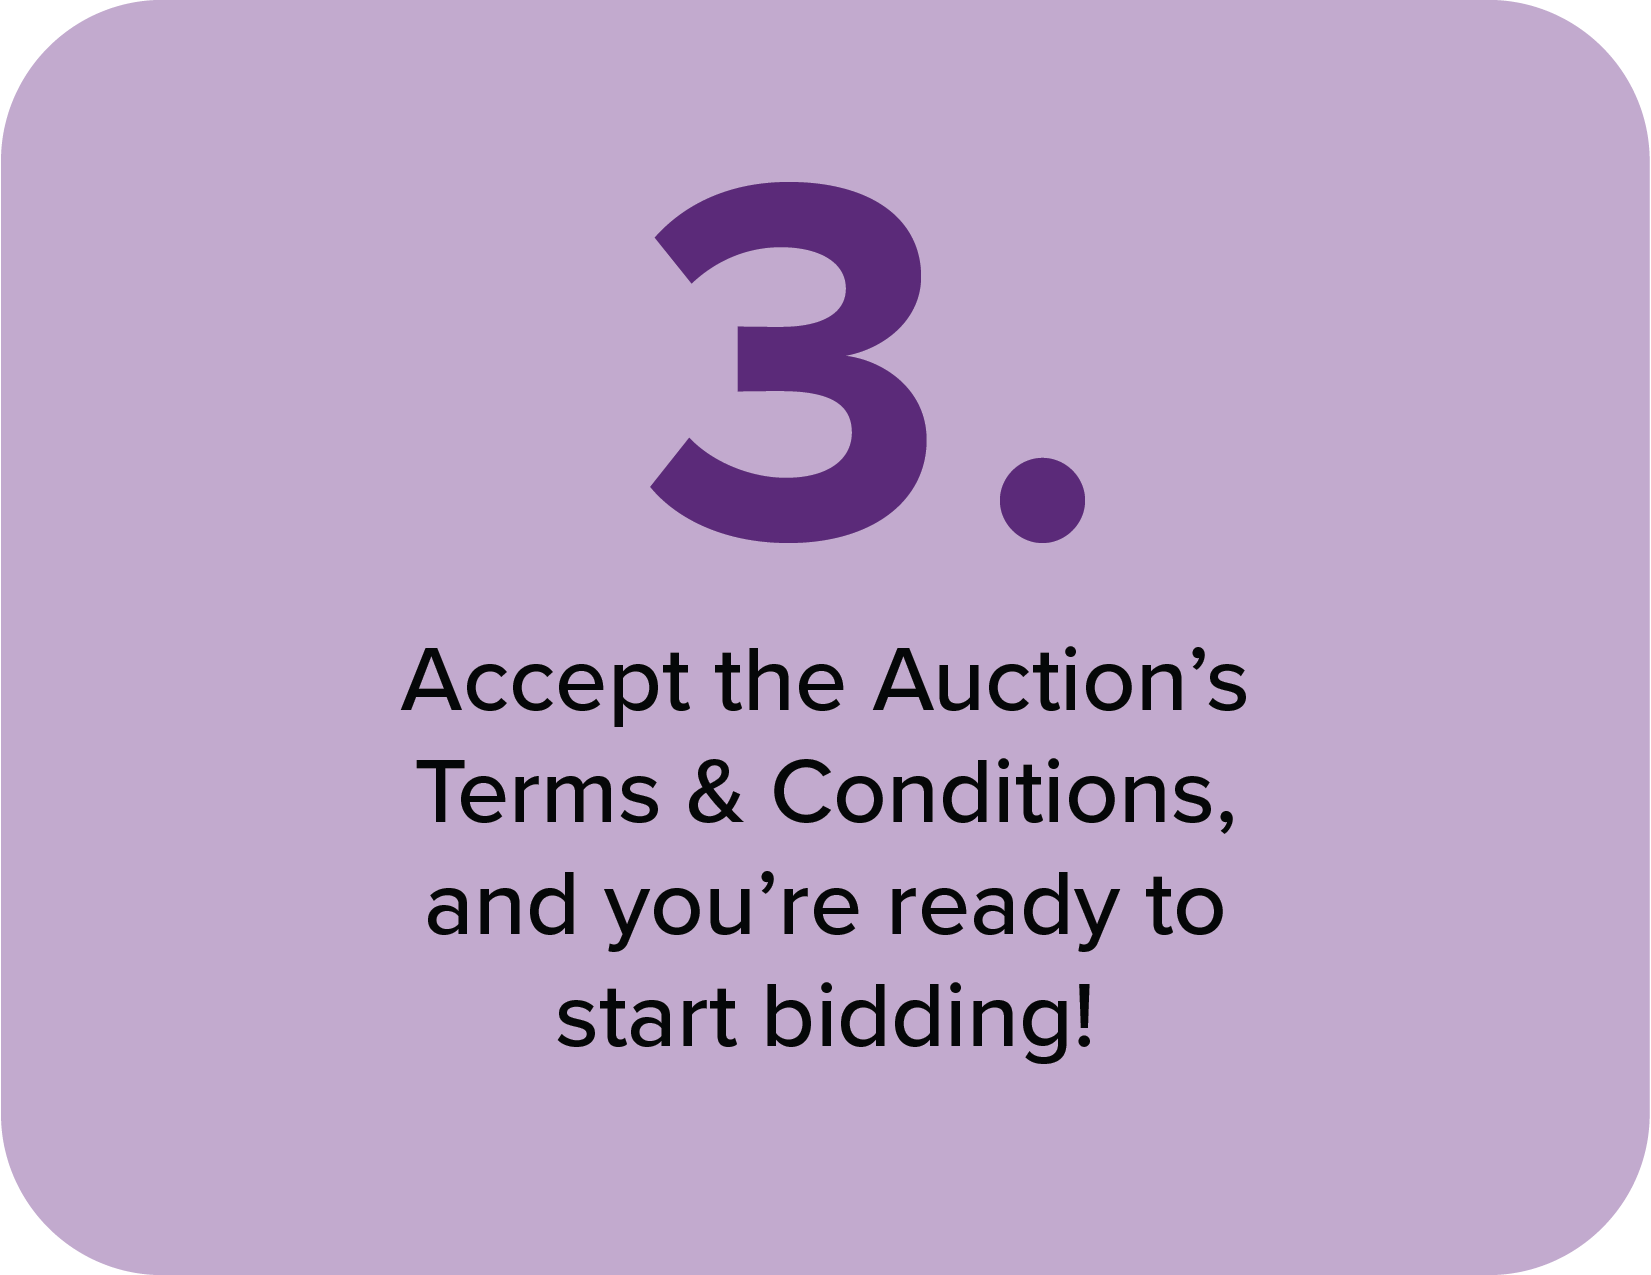 Accept an Auction's Terms & Conditions to get started!